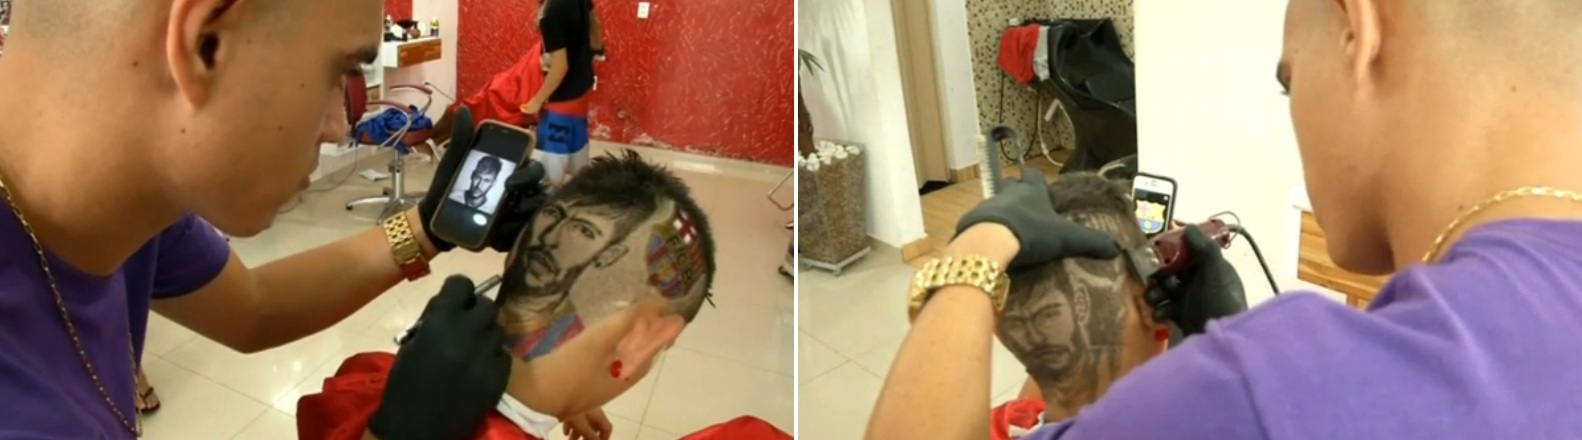 Fit for a true fan: Brazil hairdresser etches stars' faces on heads